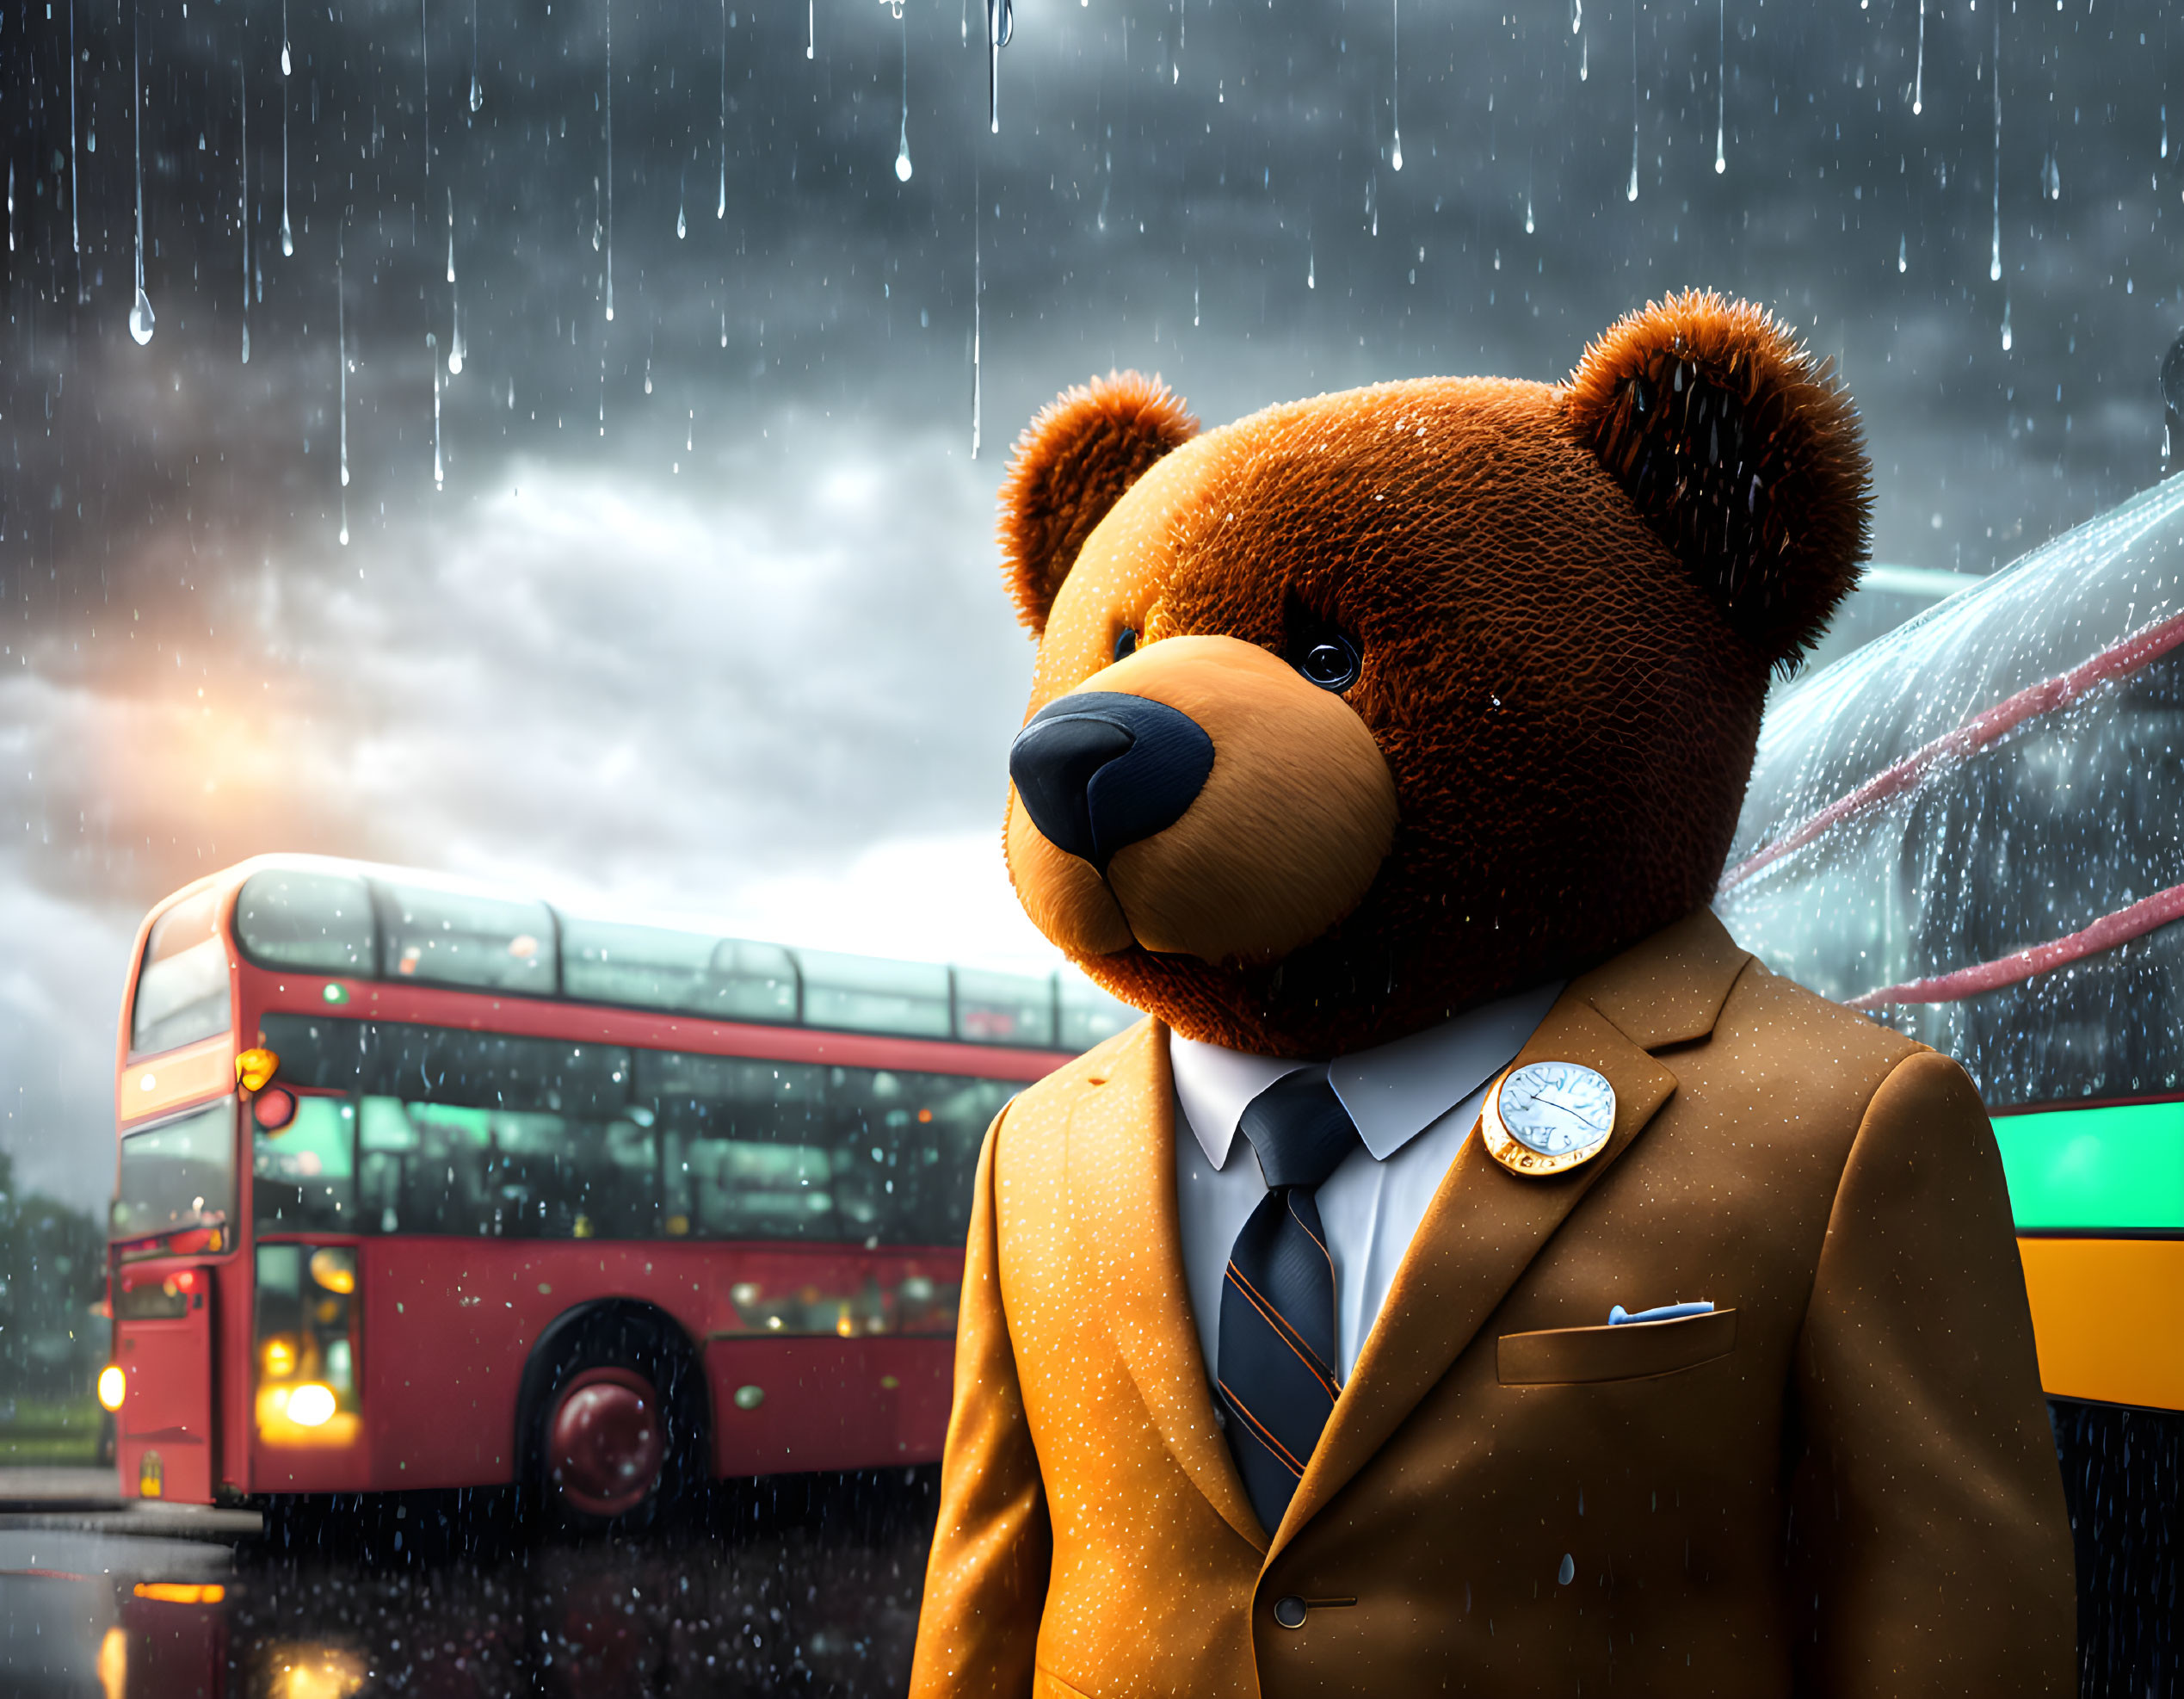 Teddy bear in suit standing in rain with red double-decker bus